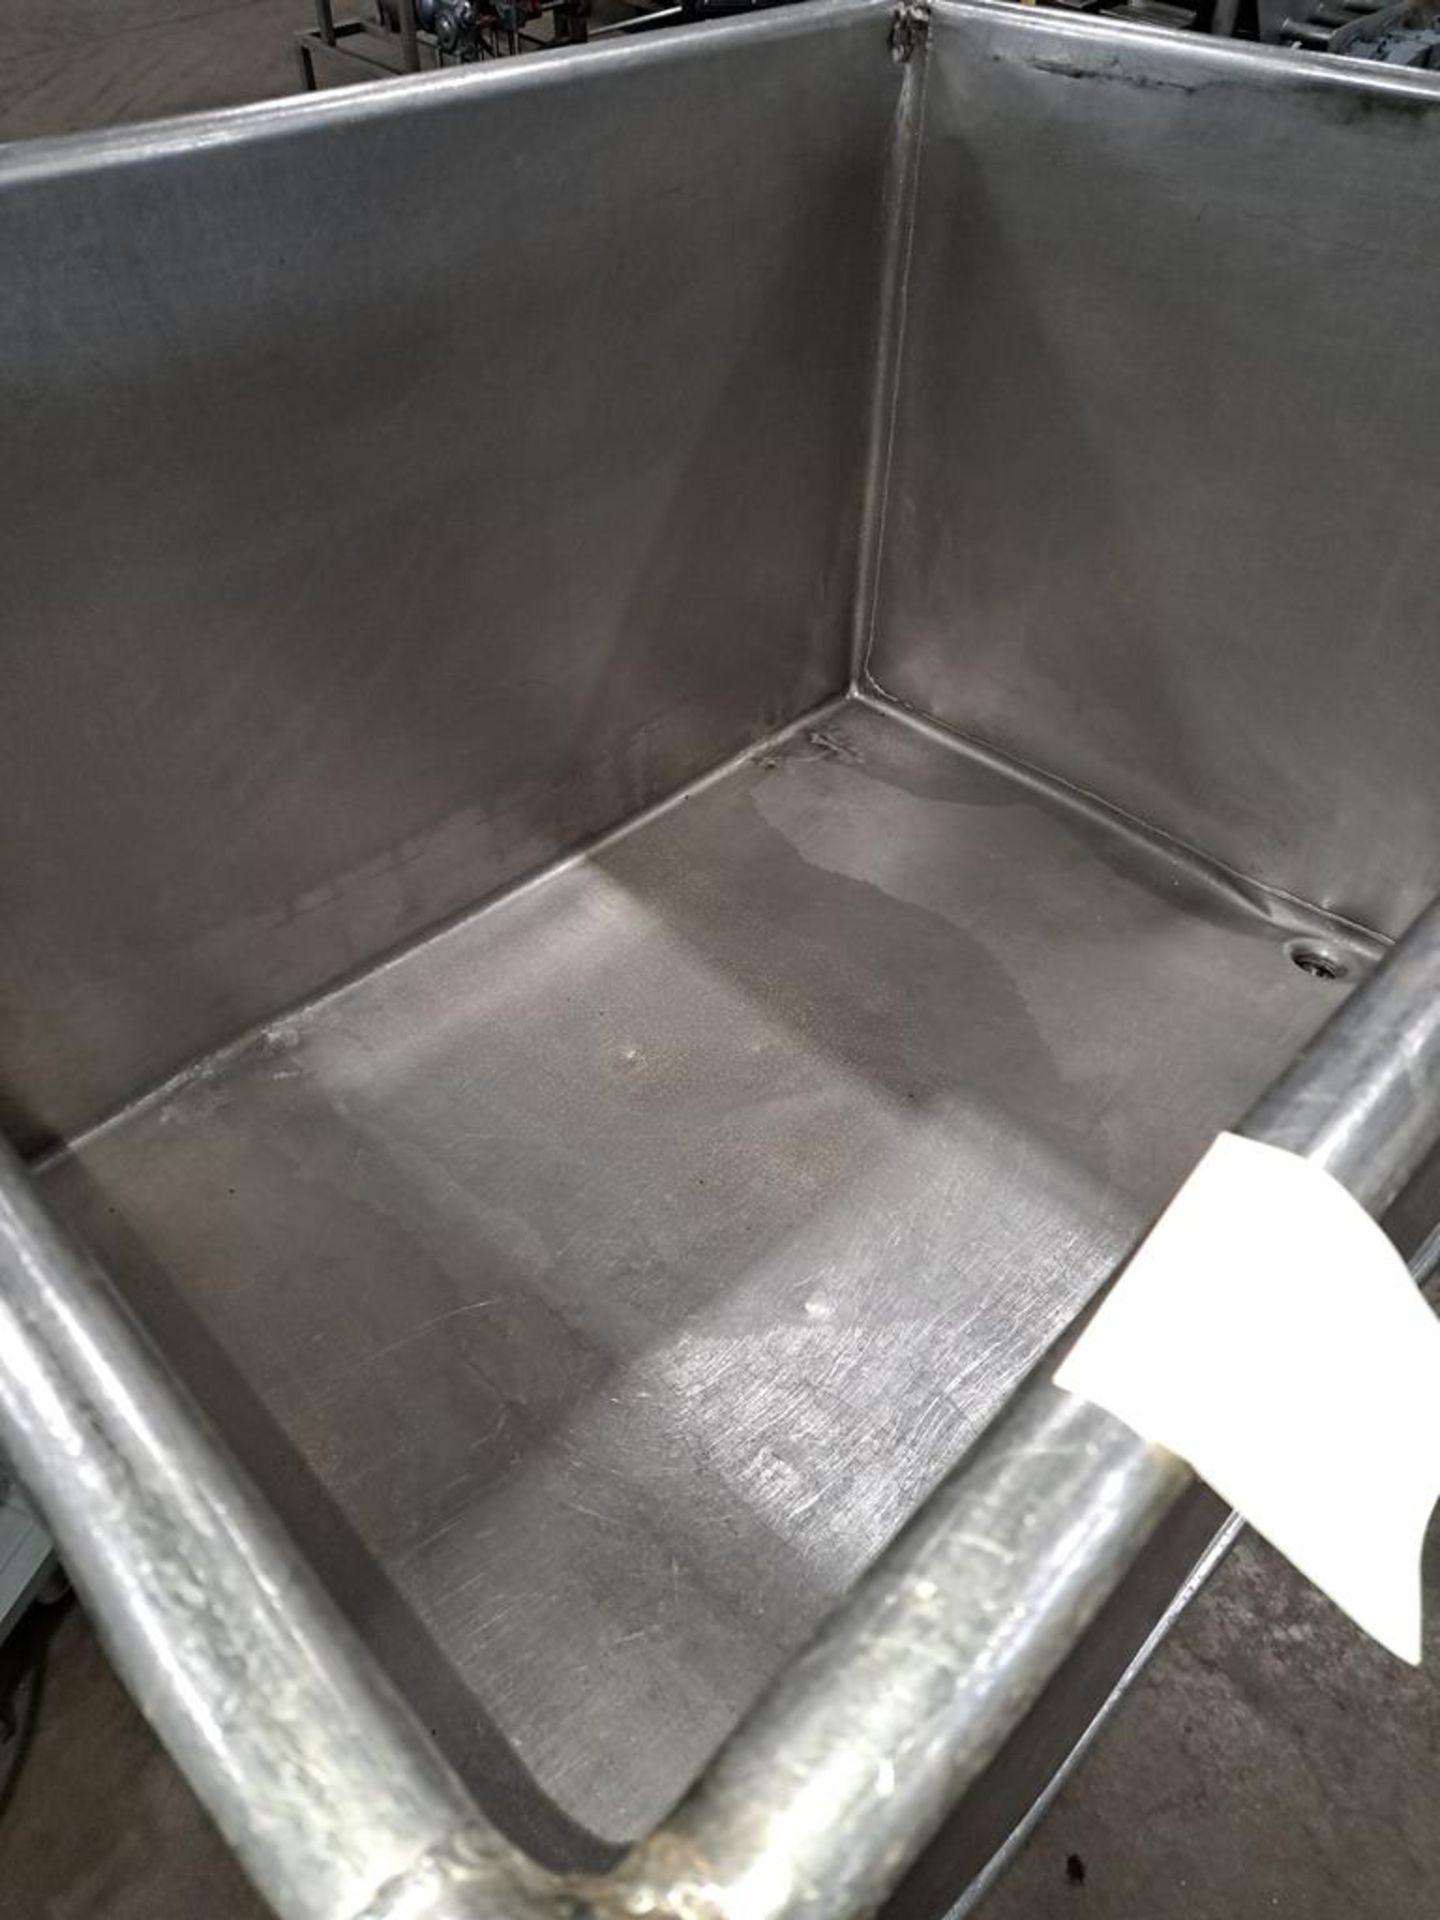 Stainless Steel Portable Vat, 3' wide X 4' long X 28" deep (Located in Plano, IL) - Image 2 of 2